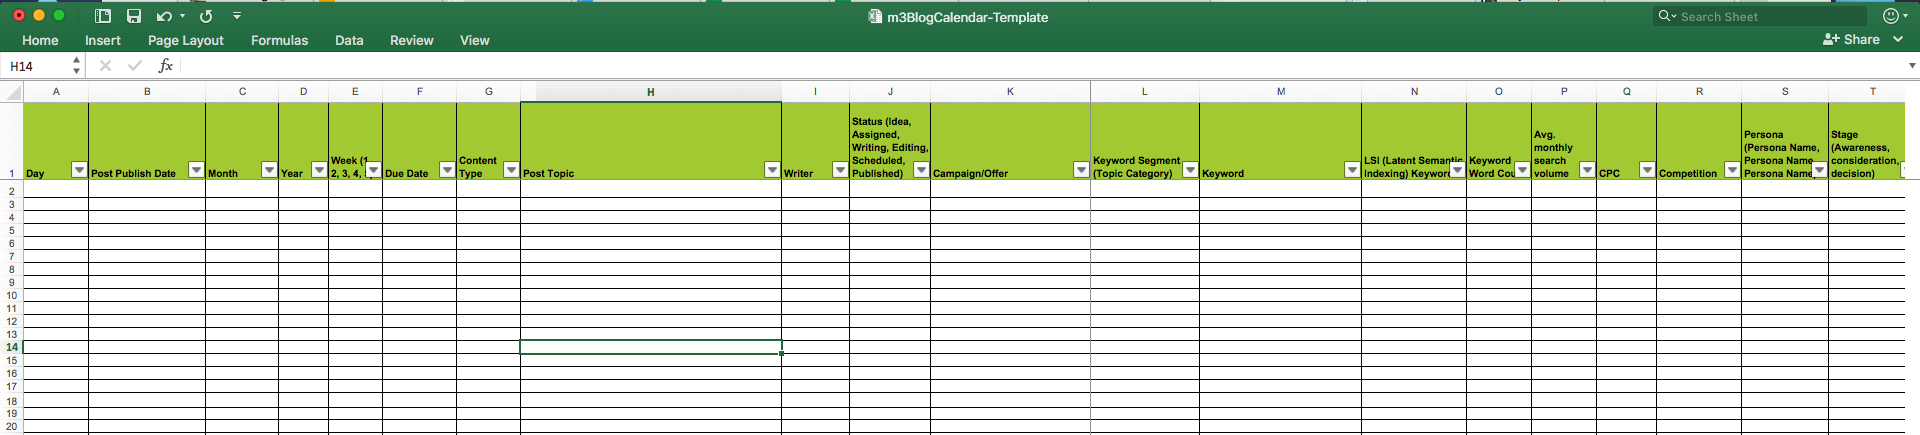 Editorial Calendar Templates For Content Marketing: The Ultimate List with Marketing Campaign Tracking Spreadsheet